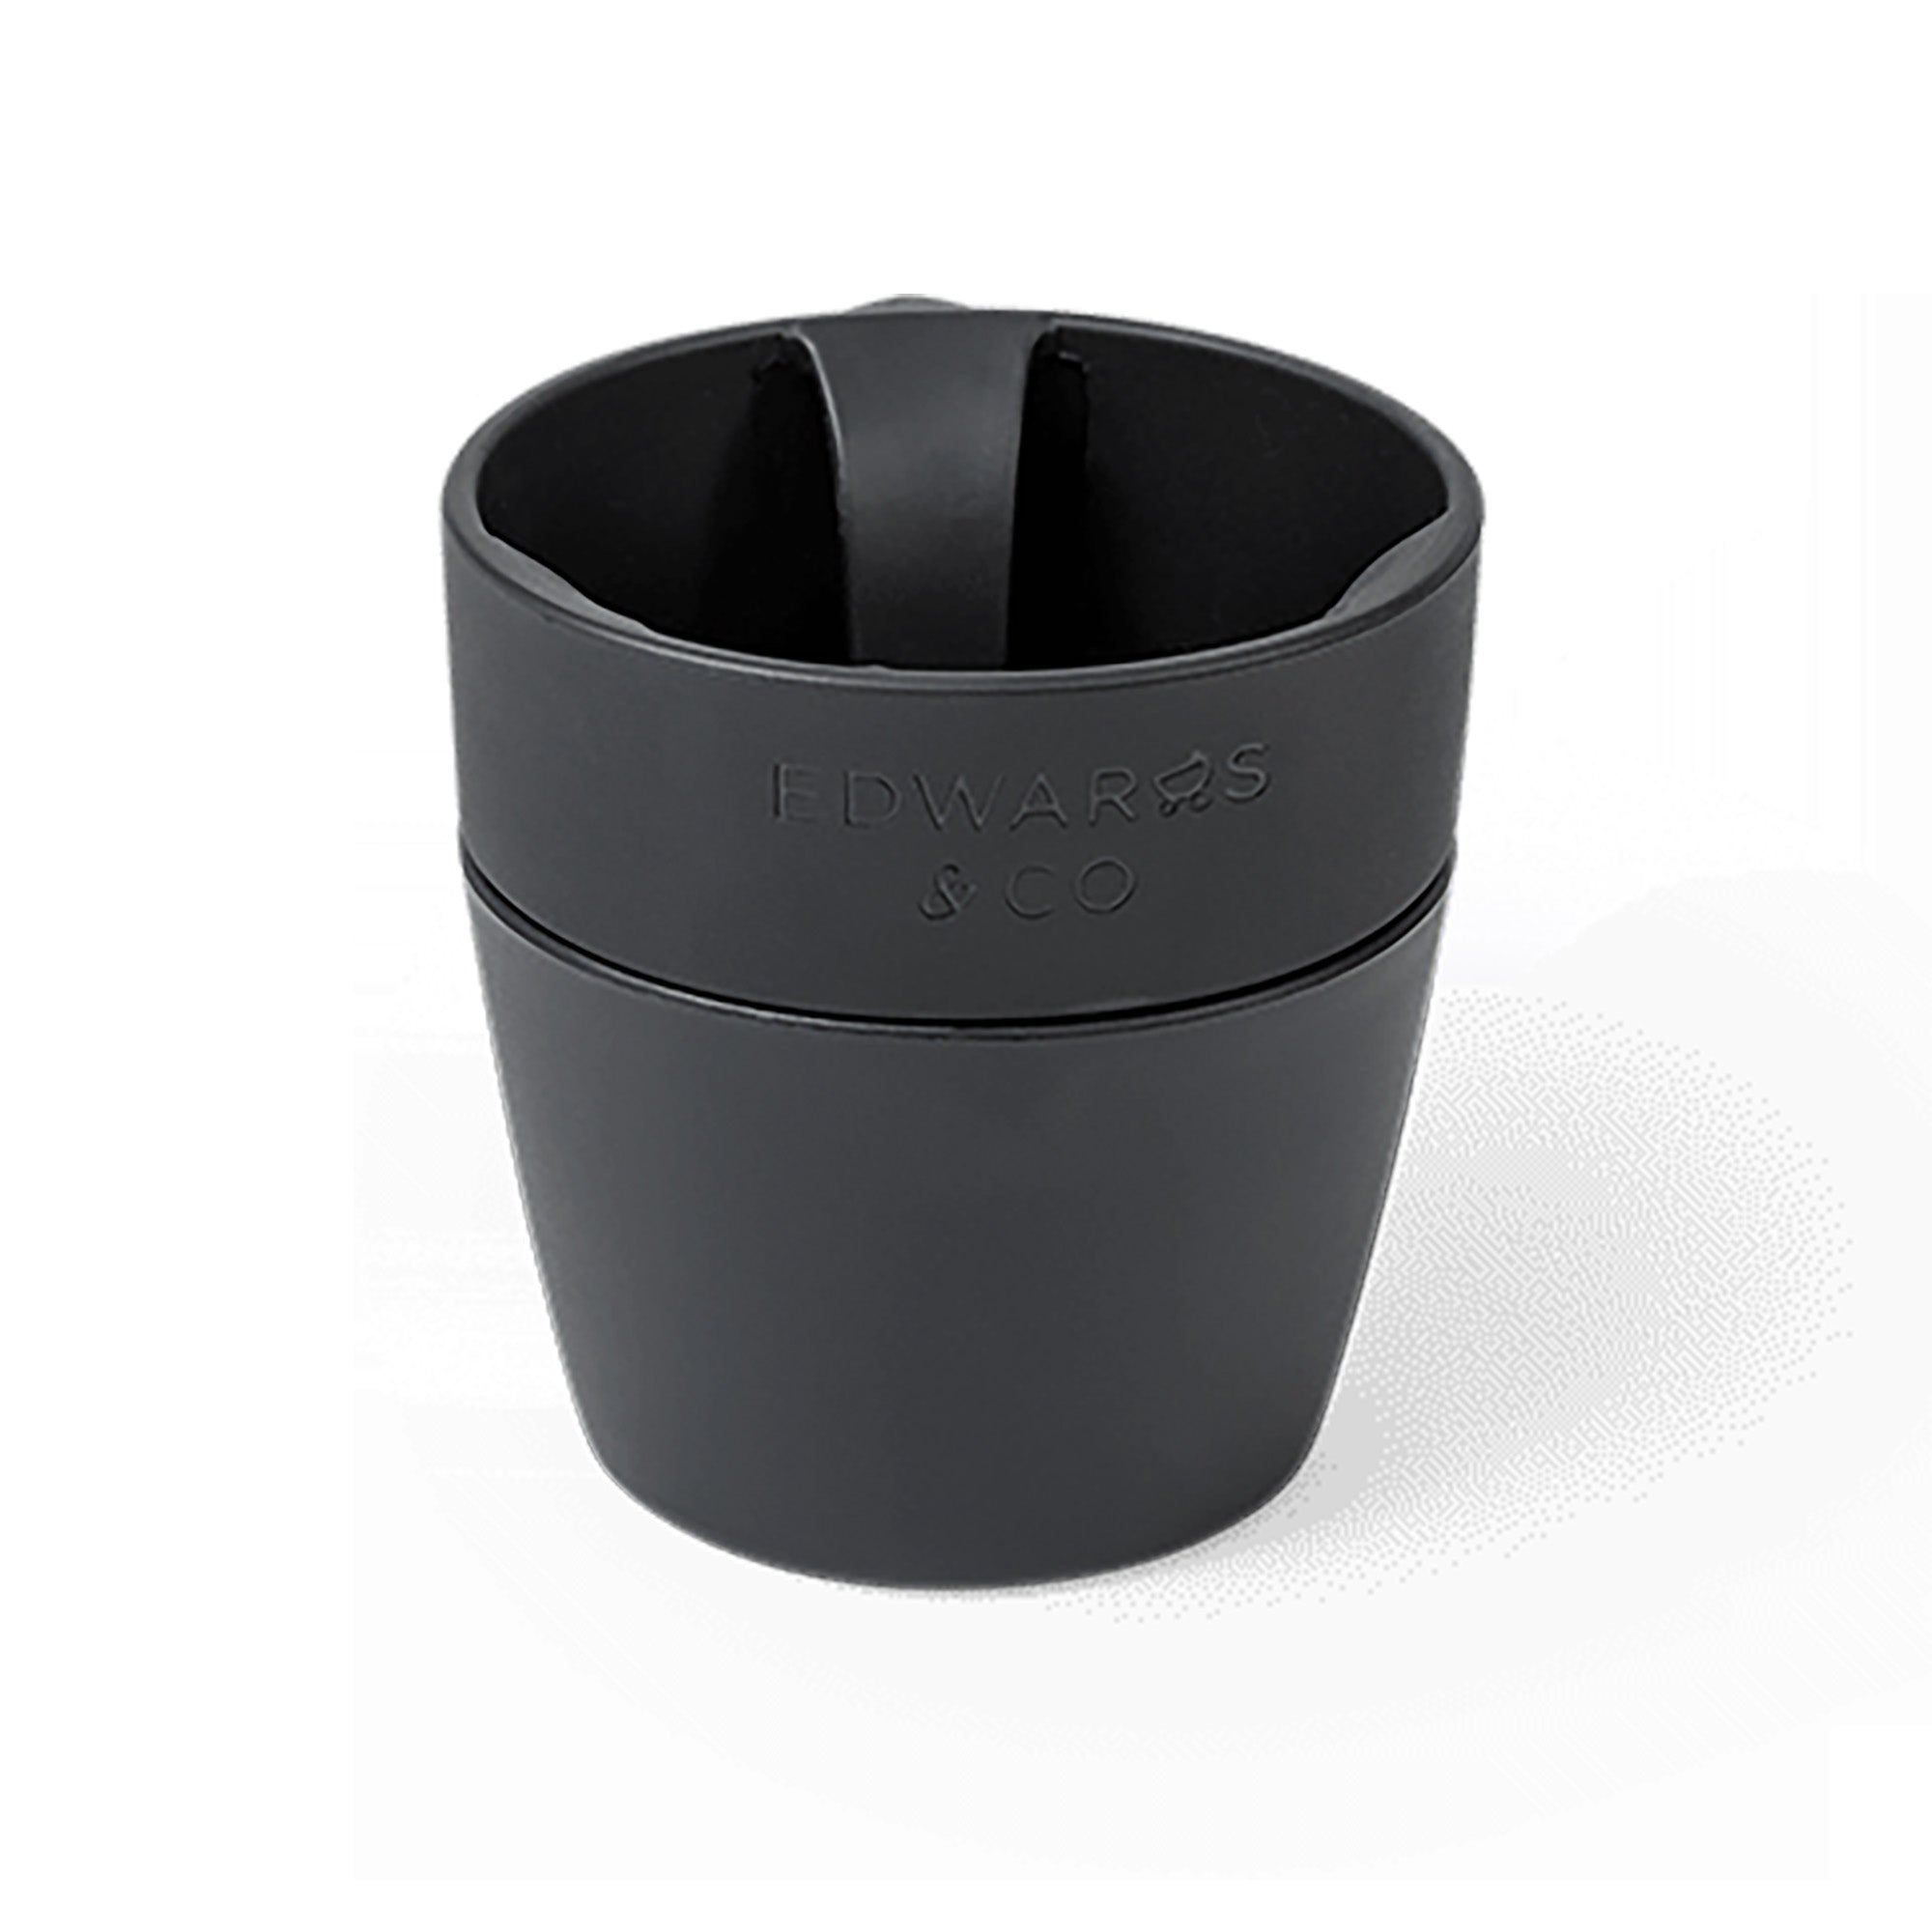 Edwards & Co Universal Cup Holder